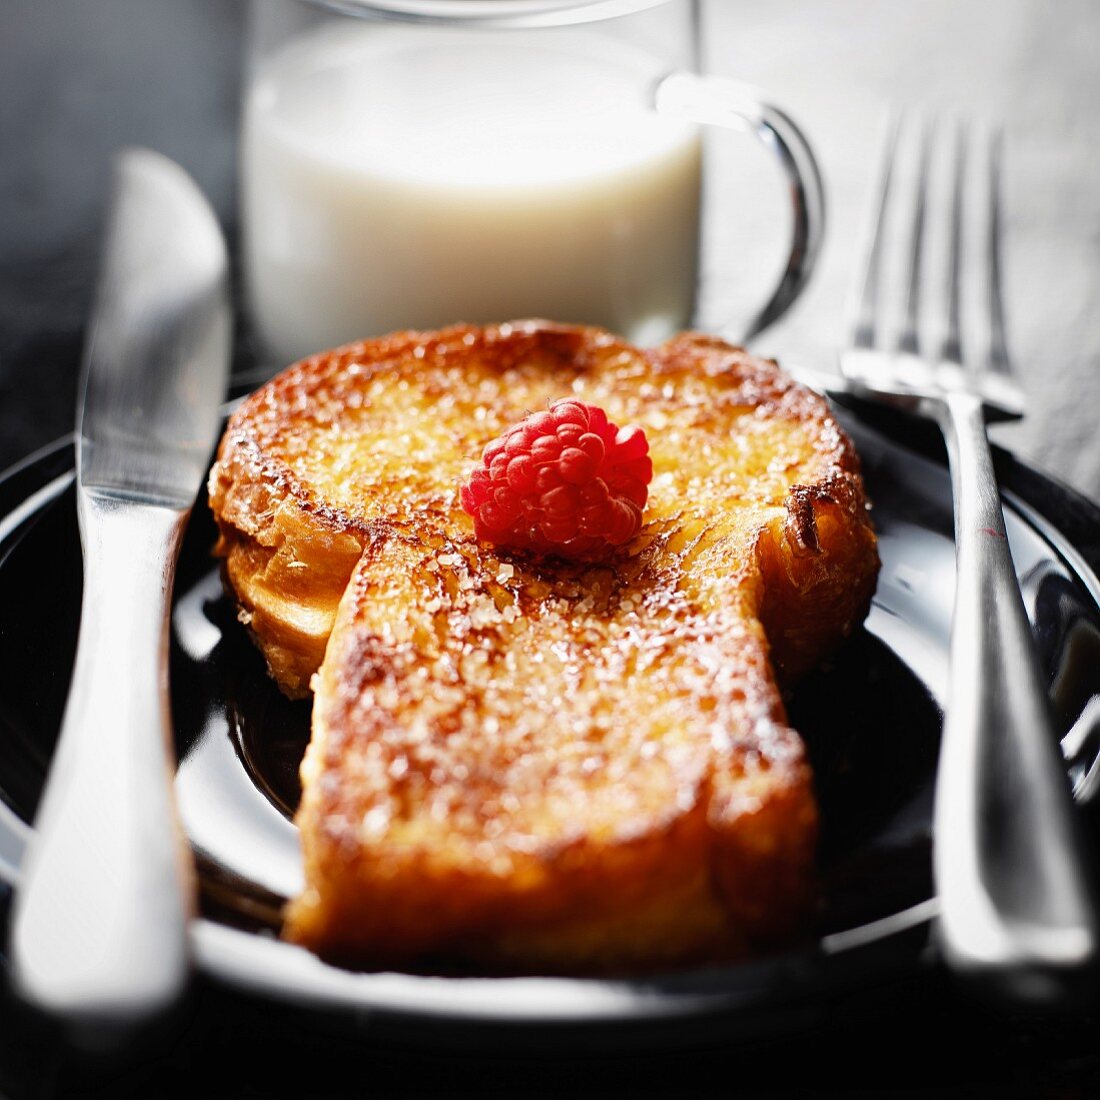 Brioche french toast and a glass of milk